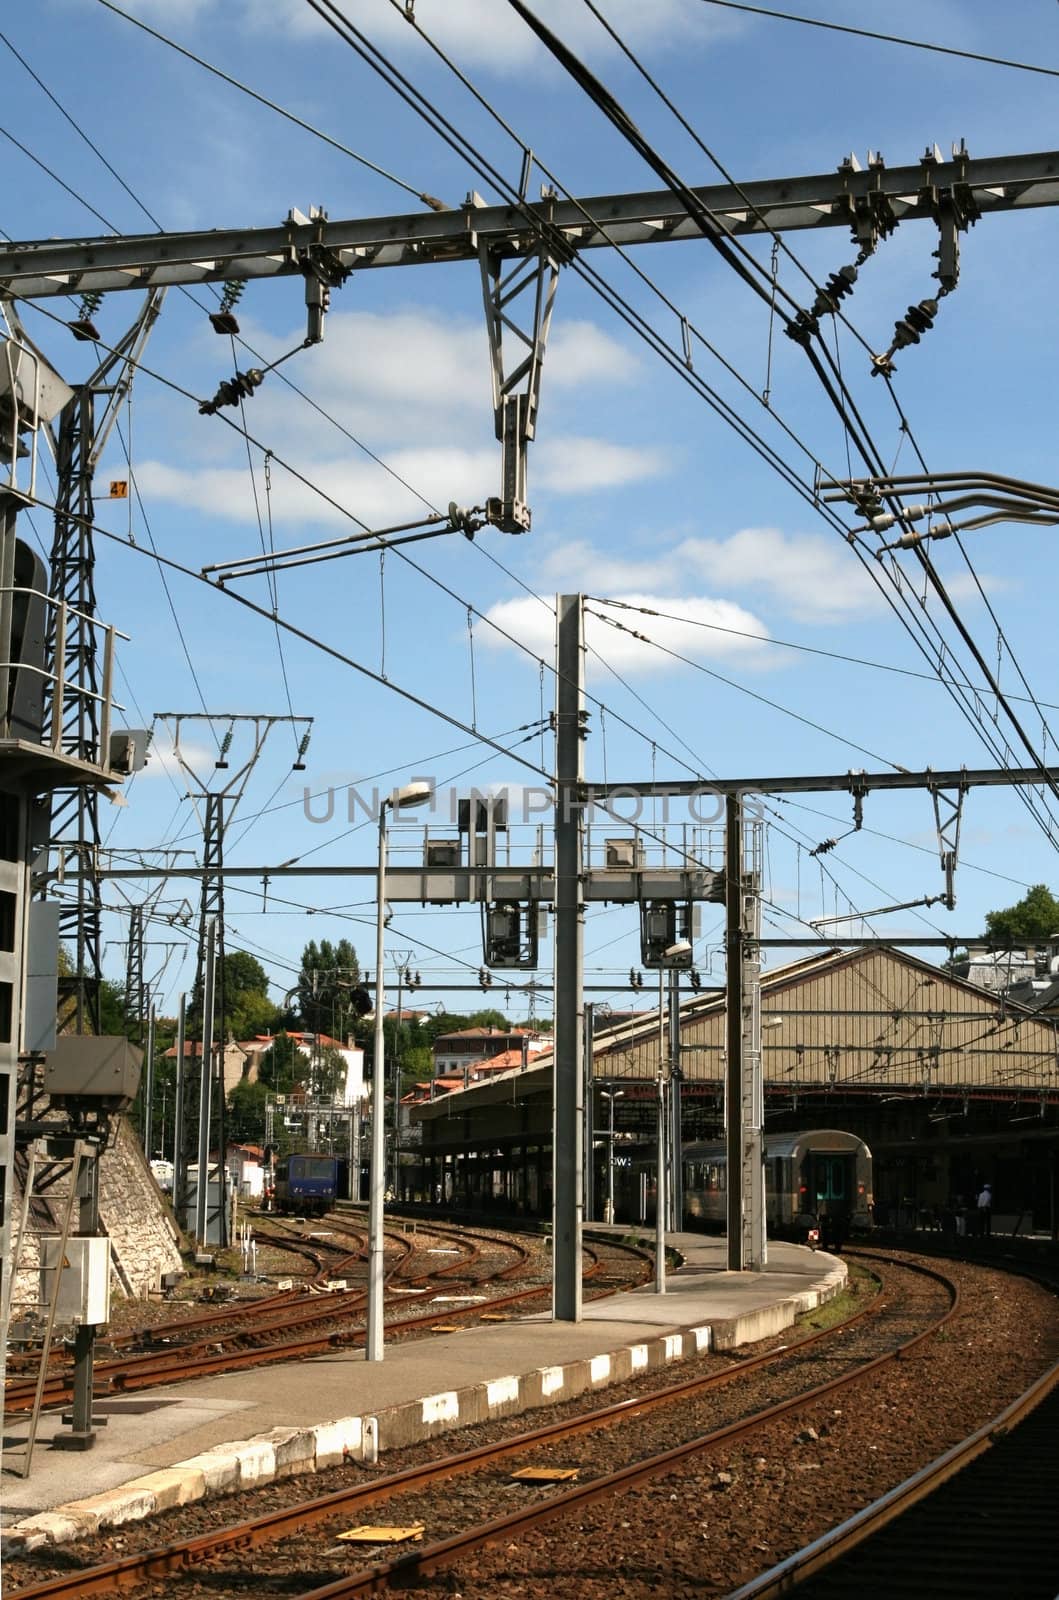 catenary and power lines in a railway station